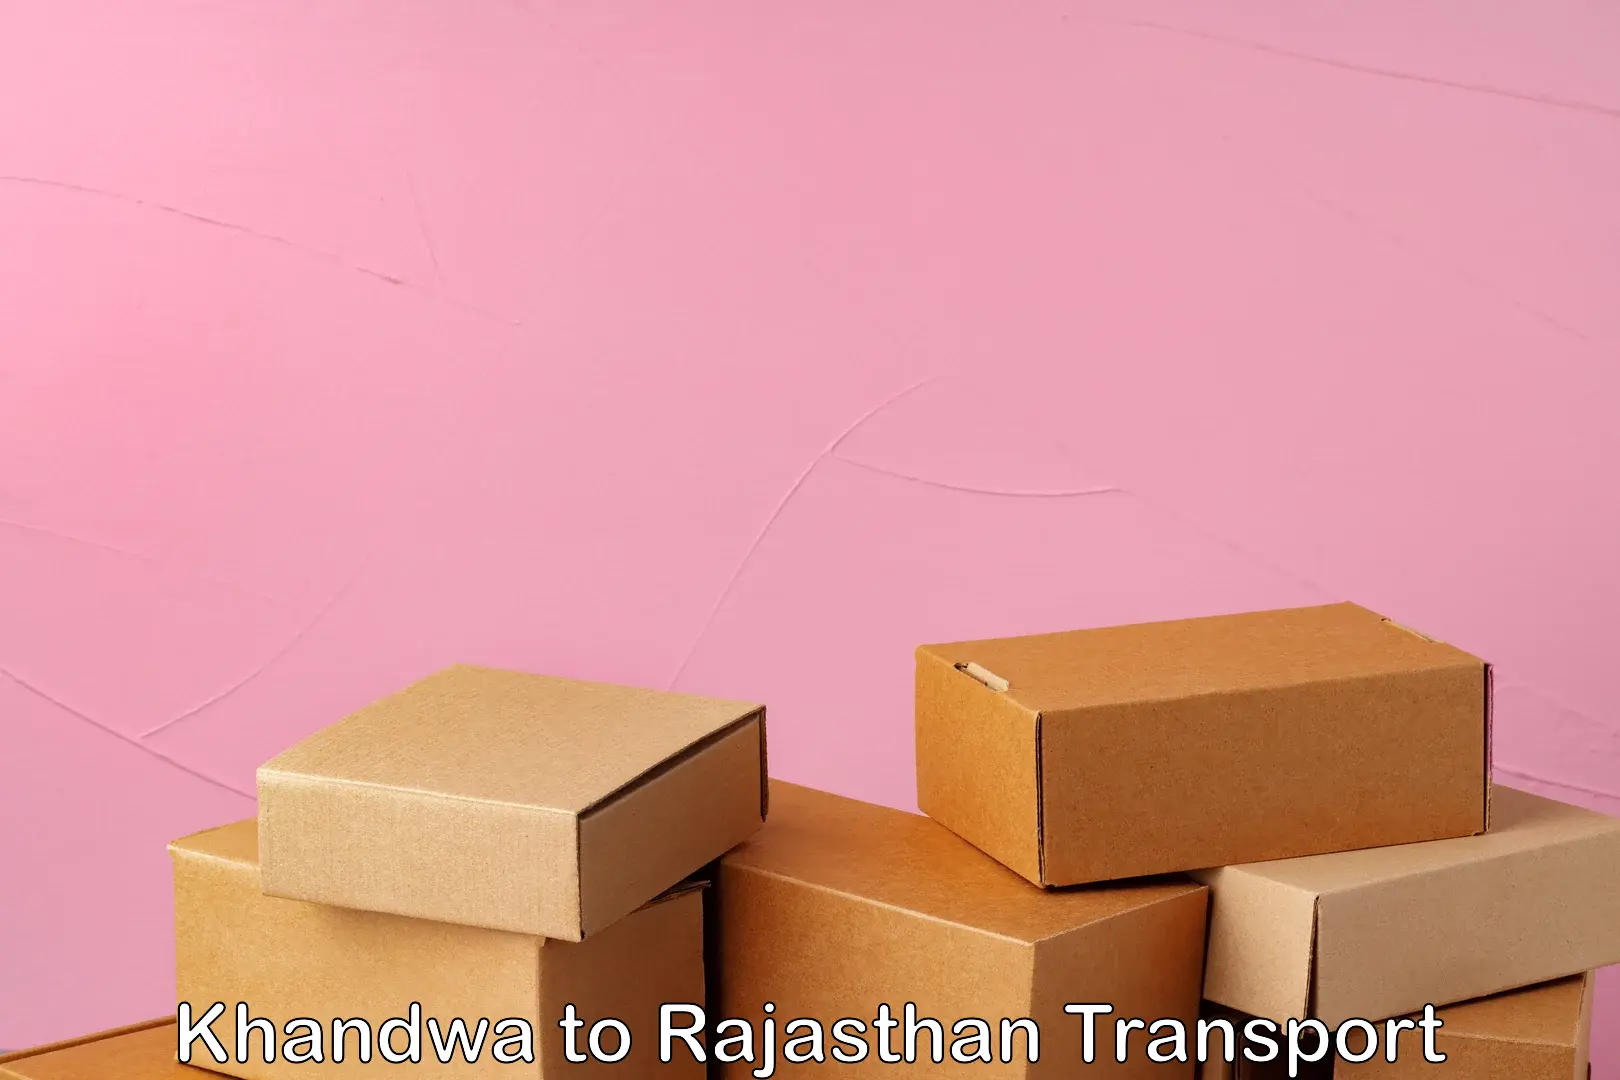 Air freight transport services Khandwa to Sikar